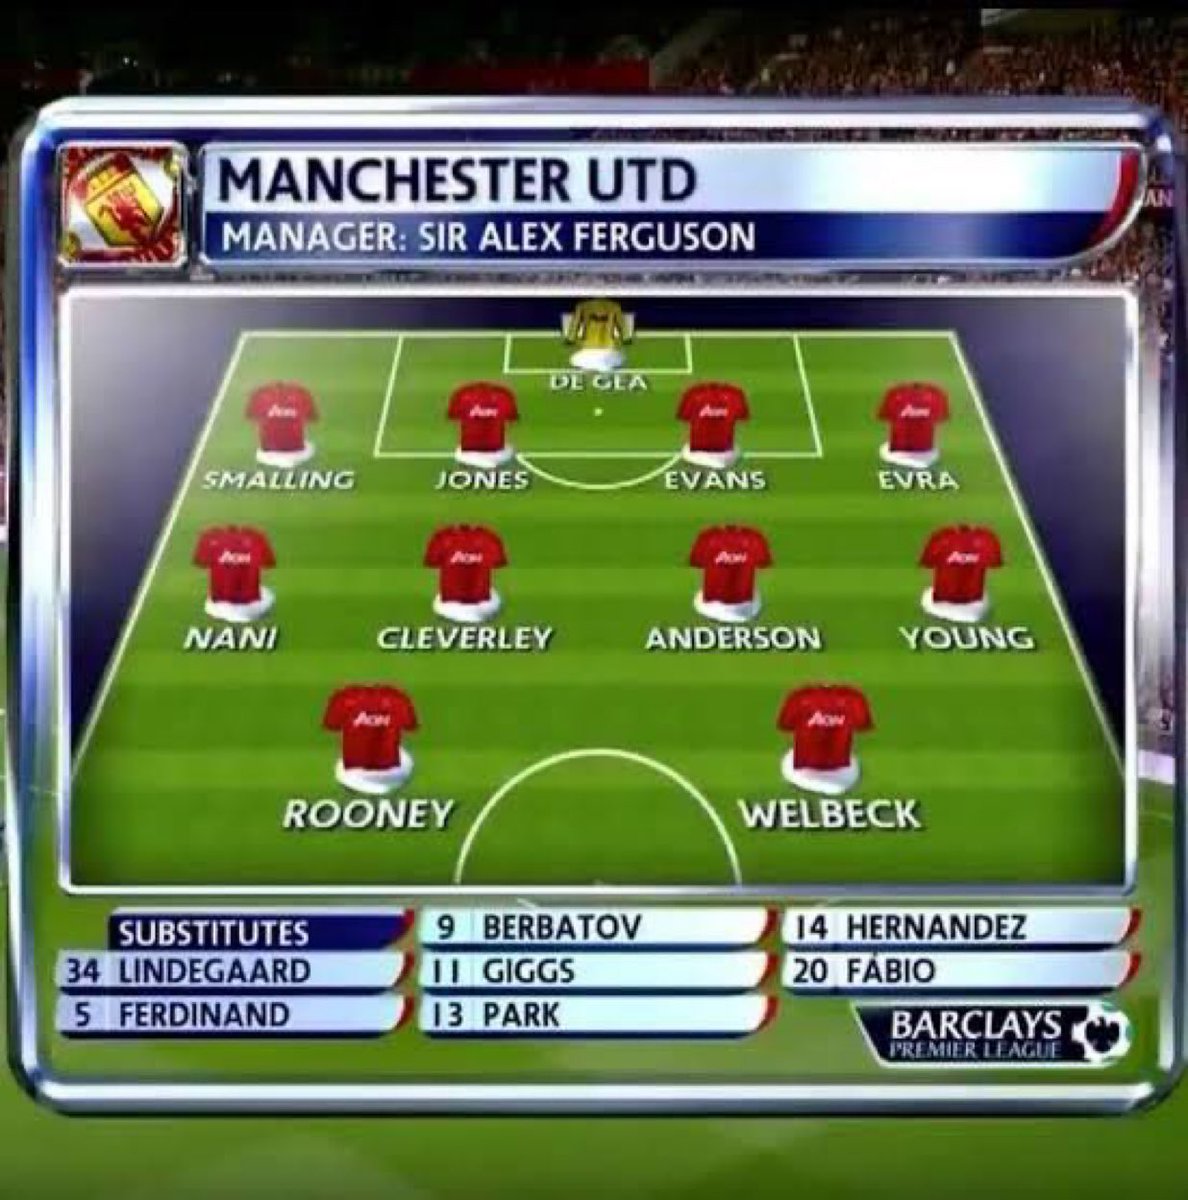 Sir Alex Ferguson won the league with this squad. 

Give Pep Guardiola this and see him fight for relegation. 😂🤣